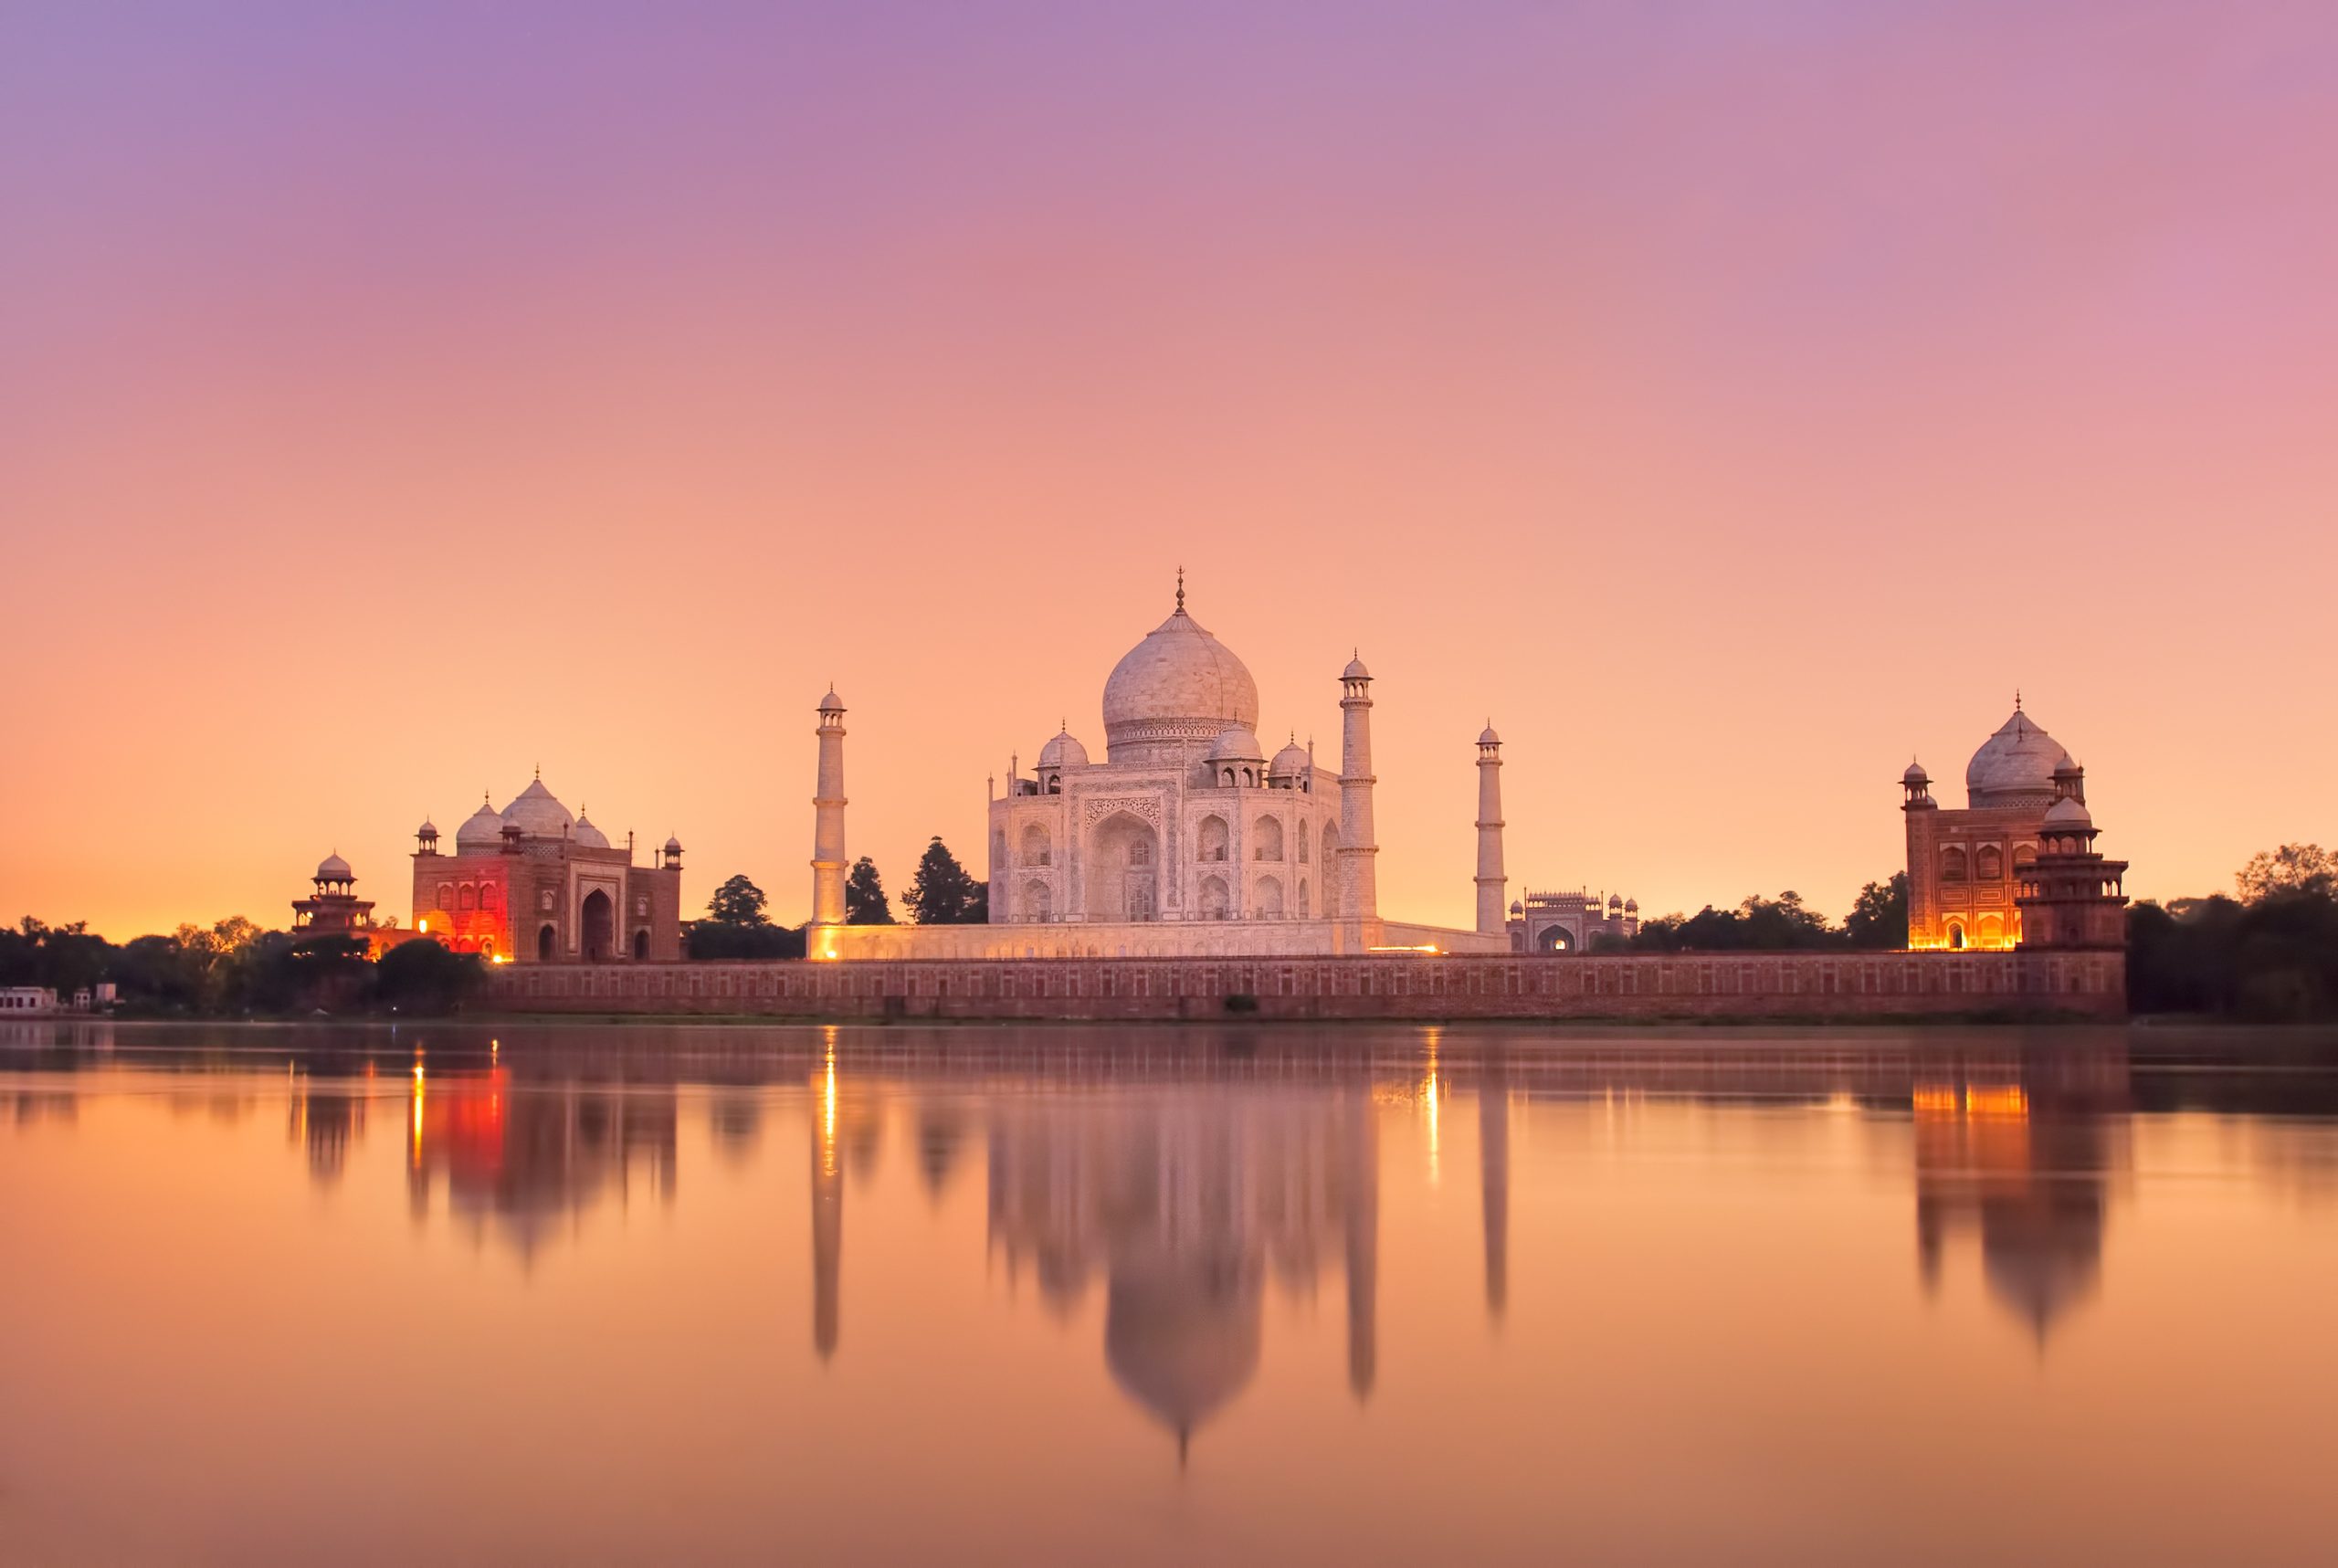 Taj Mahal and outsourcing work in India